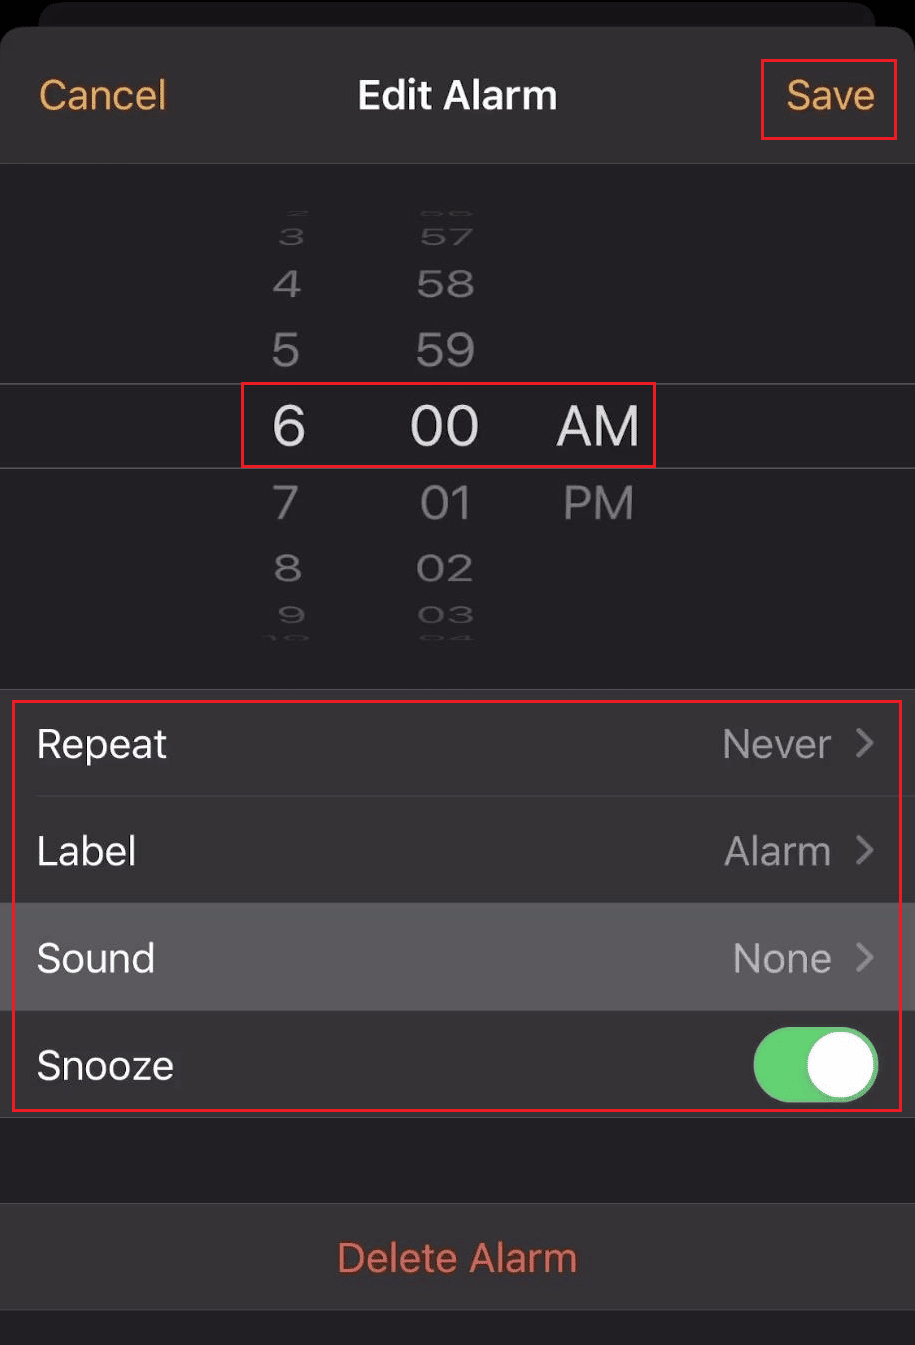 Set the Alarm time with AM or PM - Set Repeat - Label - Sound - Snooze - Save | change the alarm clock sound on my iPhone